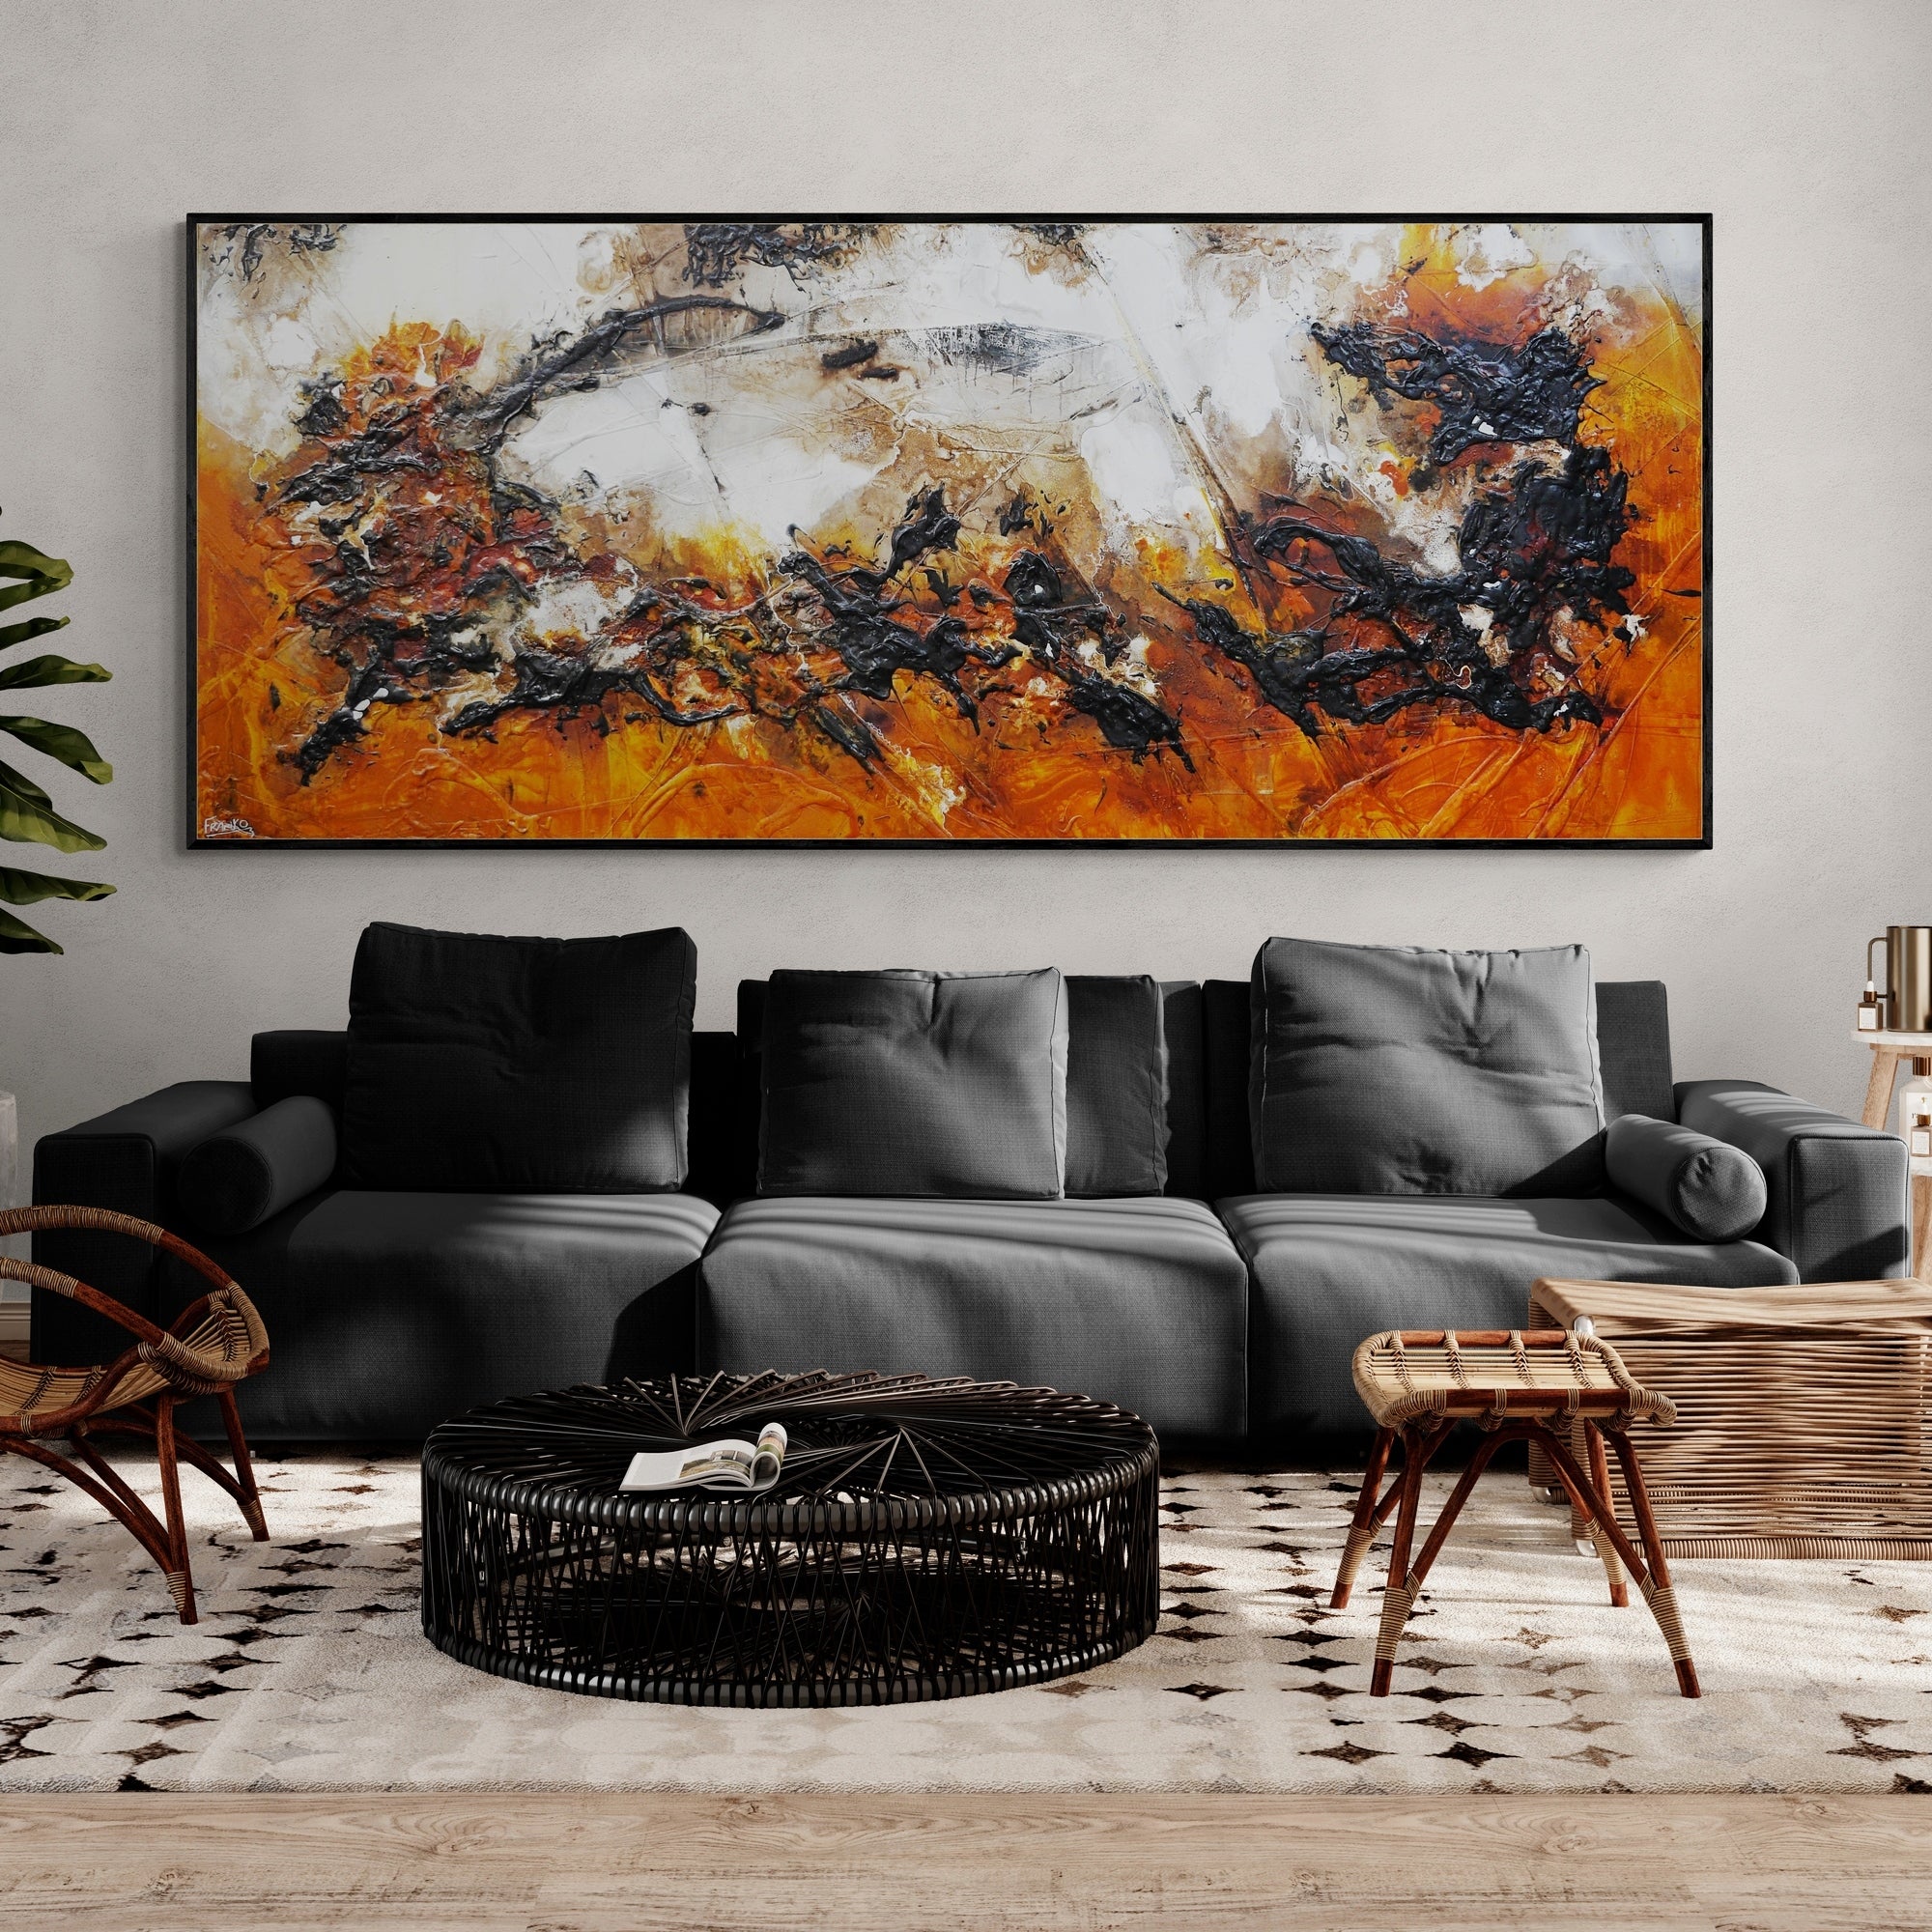 Craving Sienna 240cm x 100cm Textured Abstract Painting (SOLD)